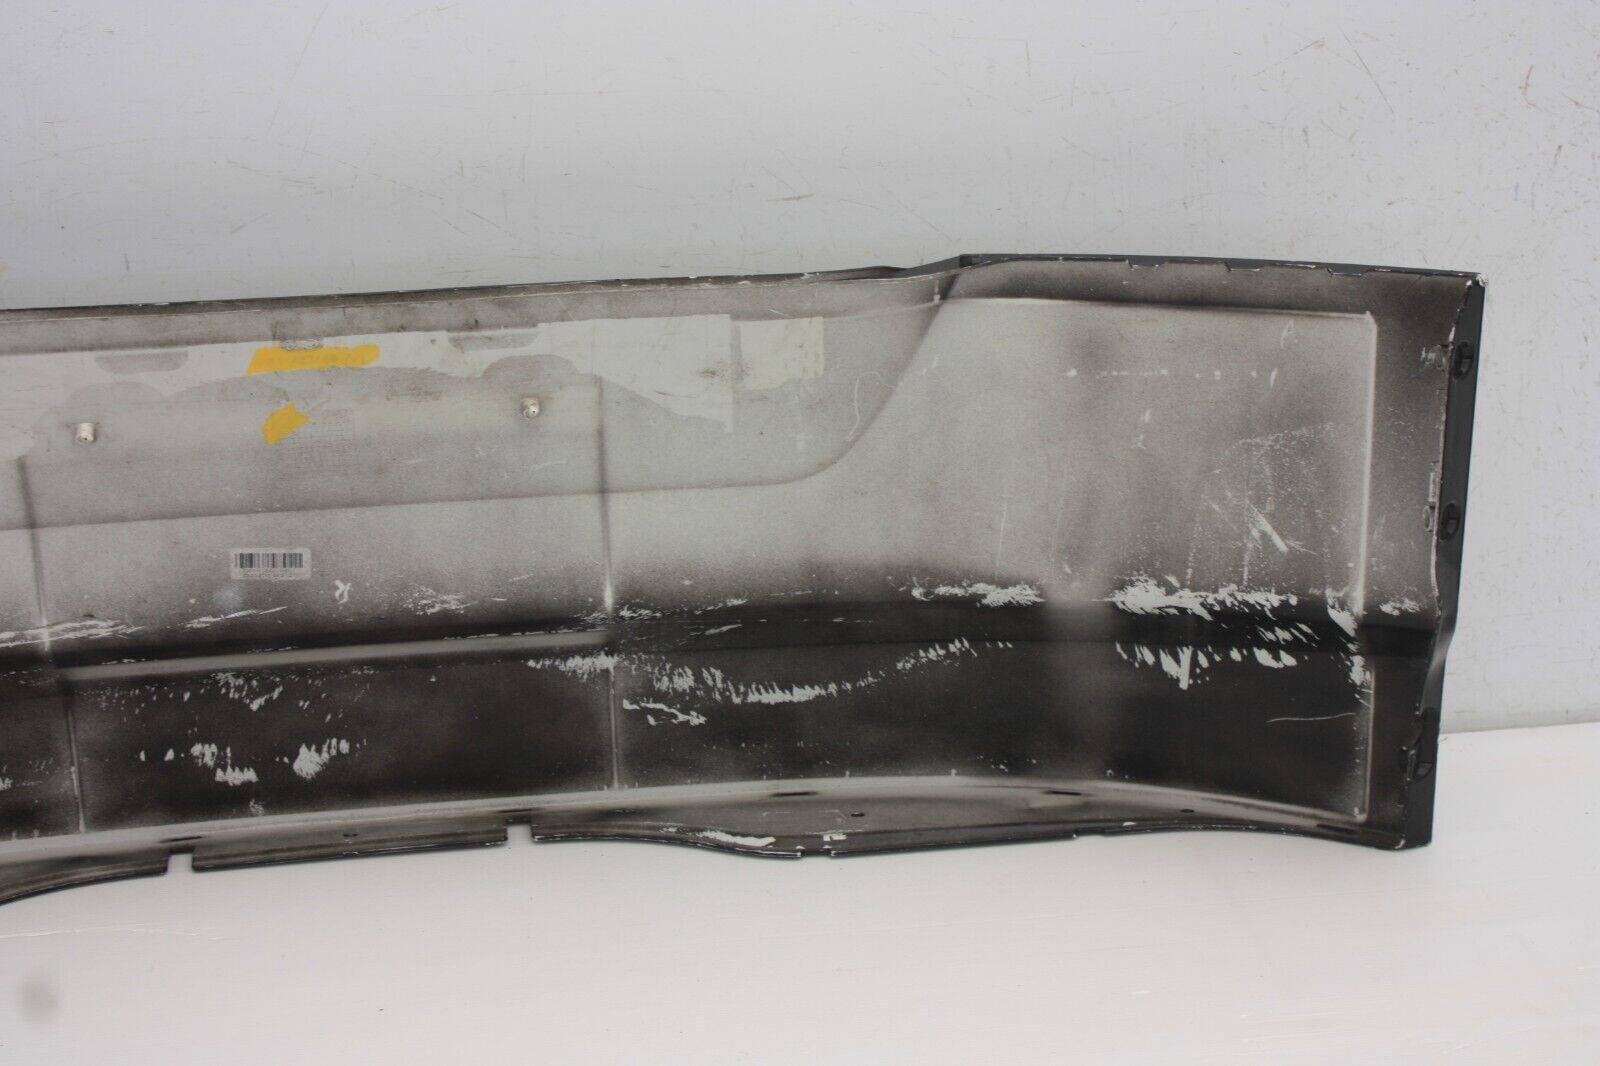 Ford-S-Max-Tailgate-Boot-Lid-Lower-Section-2010-TO-2015-AM21-423A40-AH-Genuine-175665504613-10